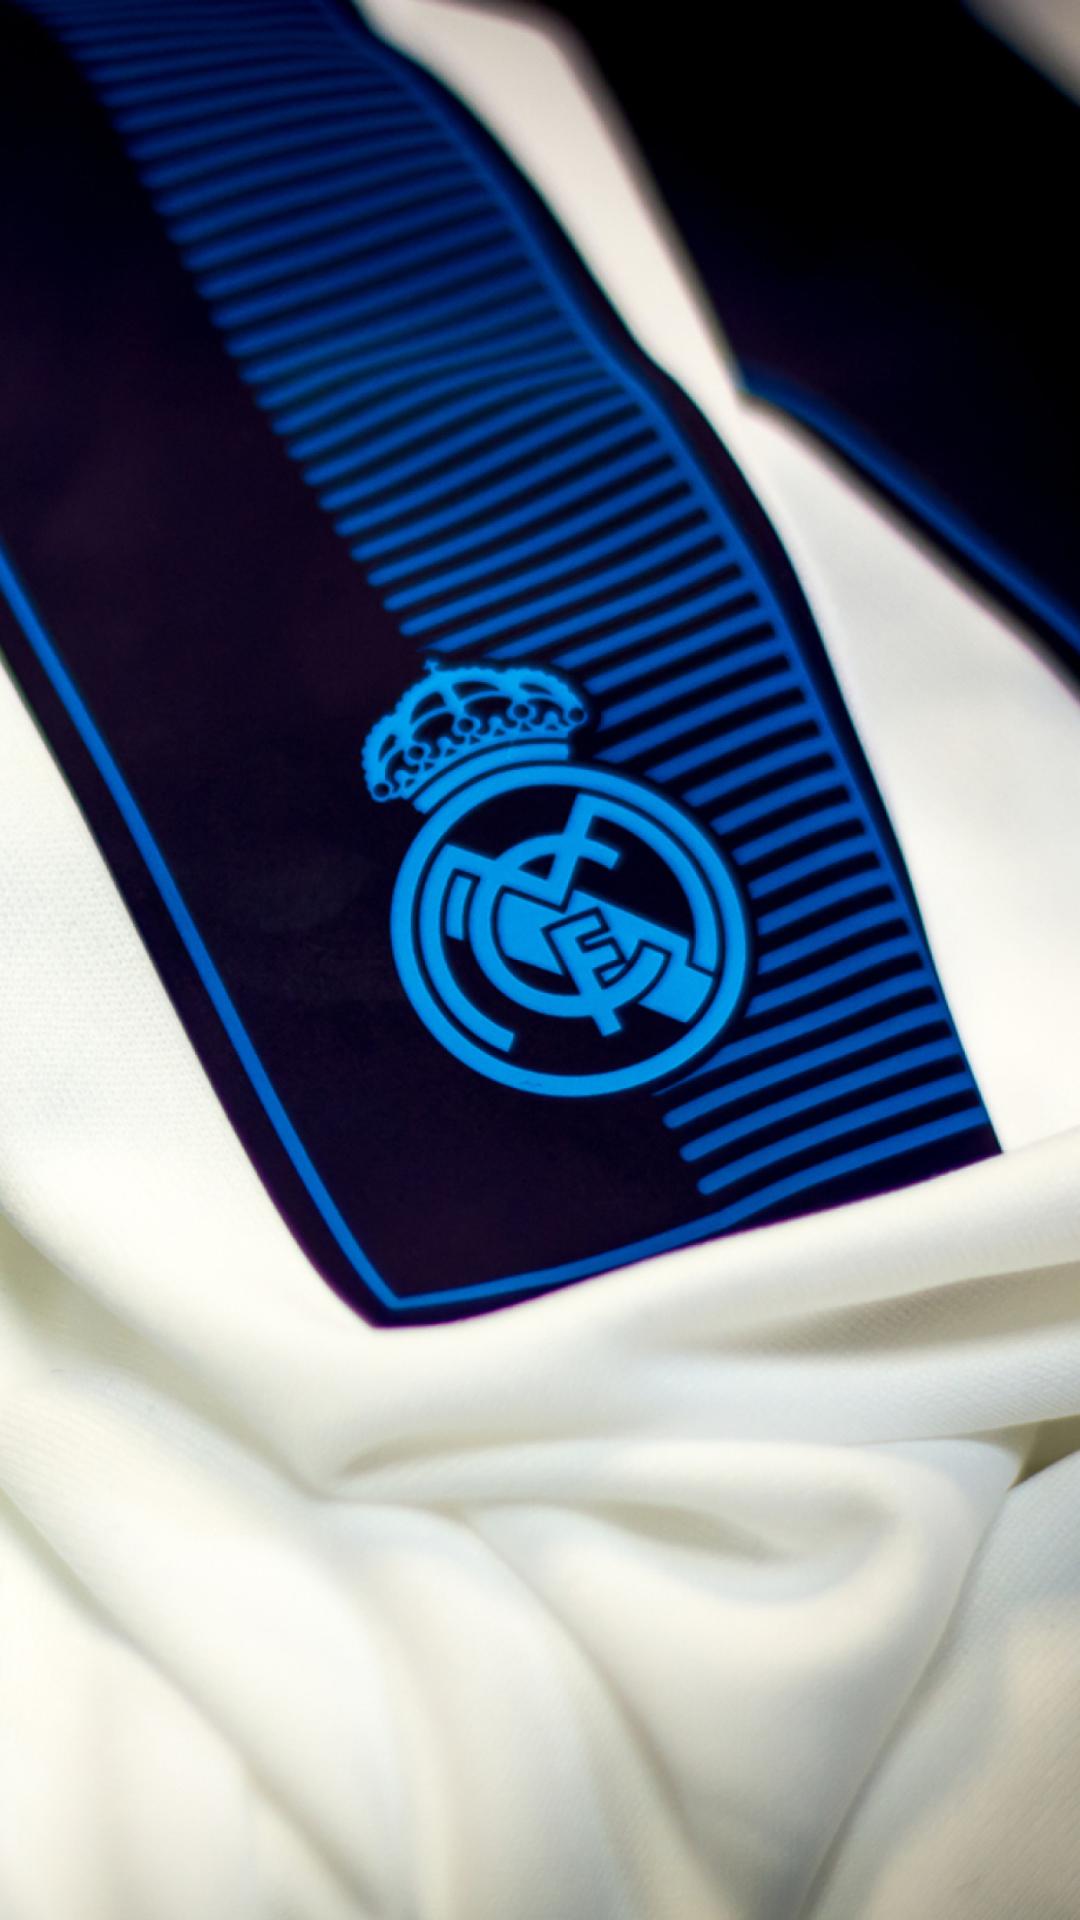 Photo by Carrey Res: 1080x1920) Real Madrid IPhone Wallpaper